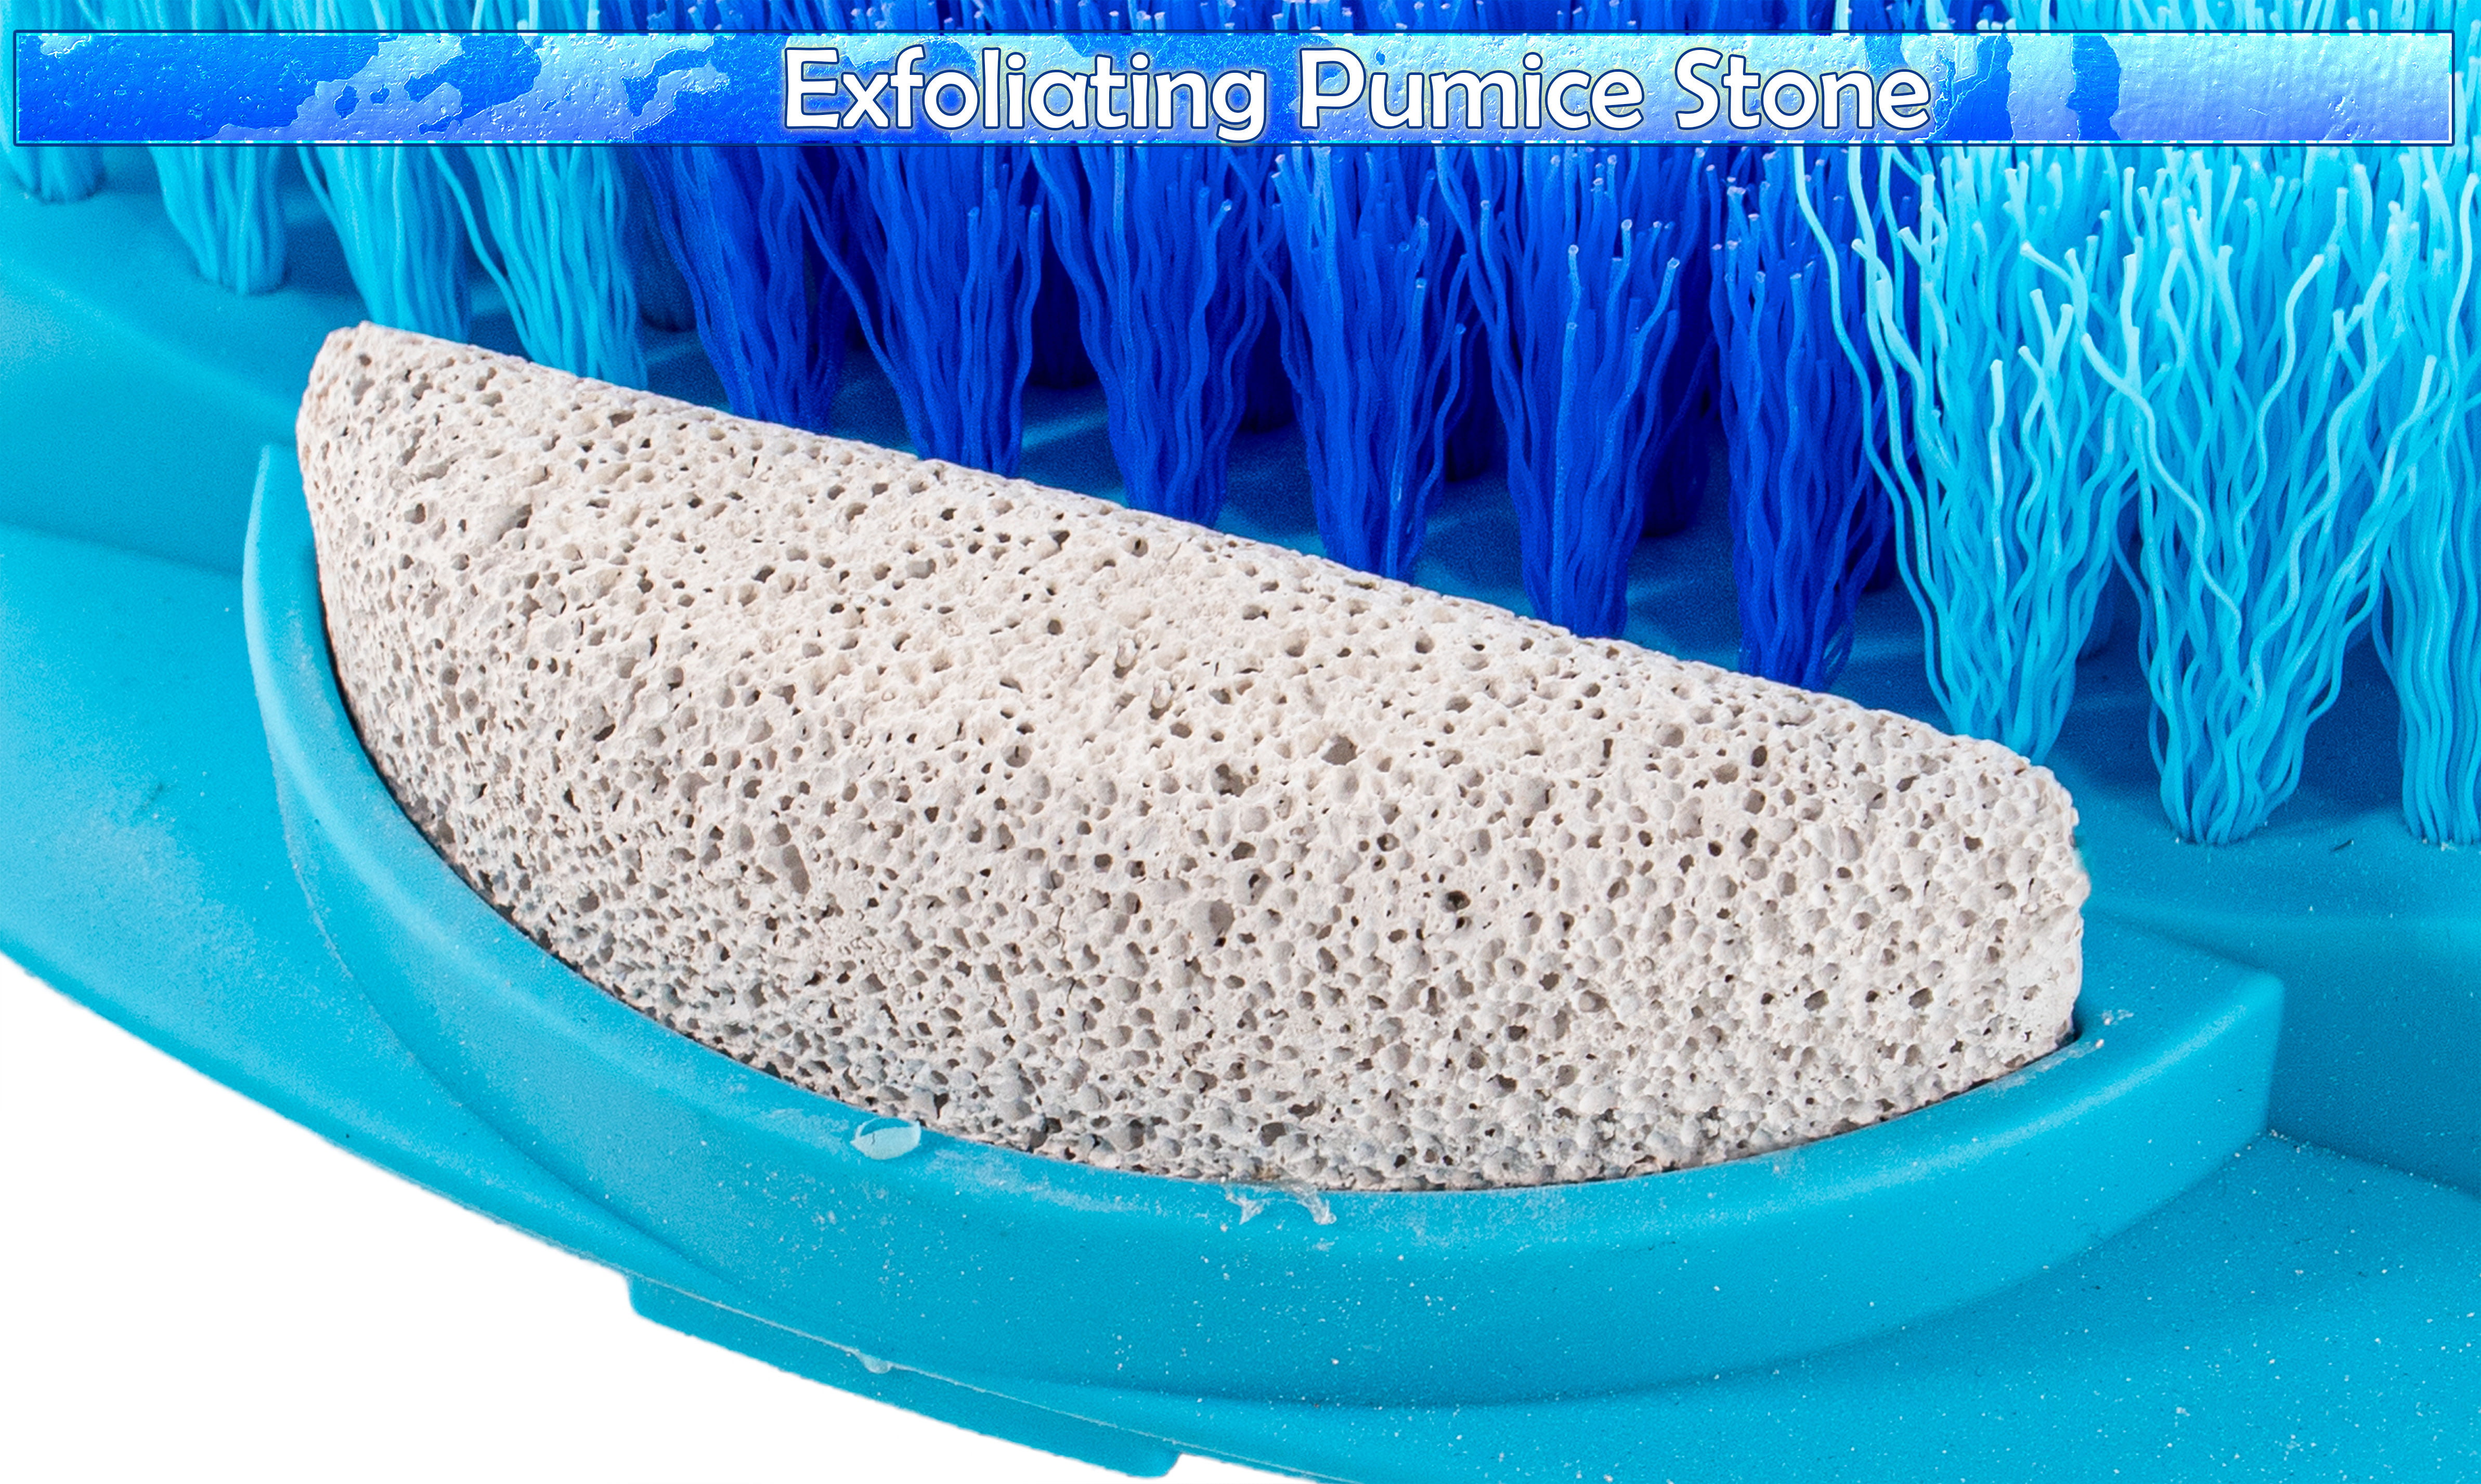 Foot Scrubber Shower Mat with Pumice Stone 80 * 40 cm Anti-Slip Shower Foot  Scrubber Mat Flexible TPE Foot Scrubber for Shower Floor No-Slip Shower Mat  for Feet Massage Exfoliation